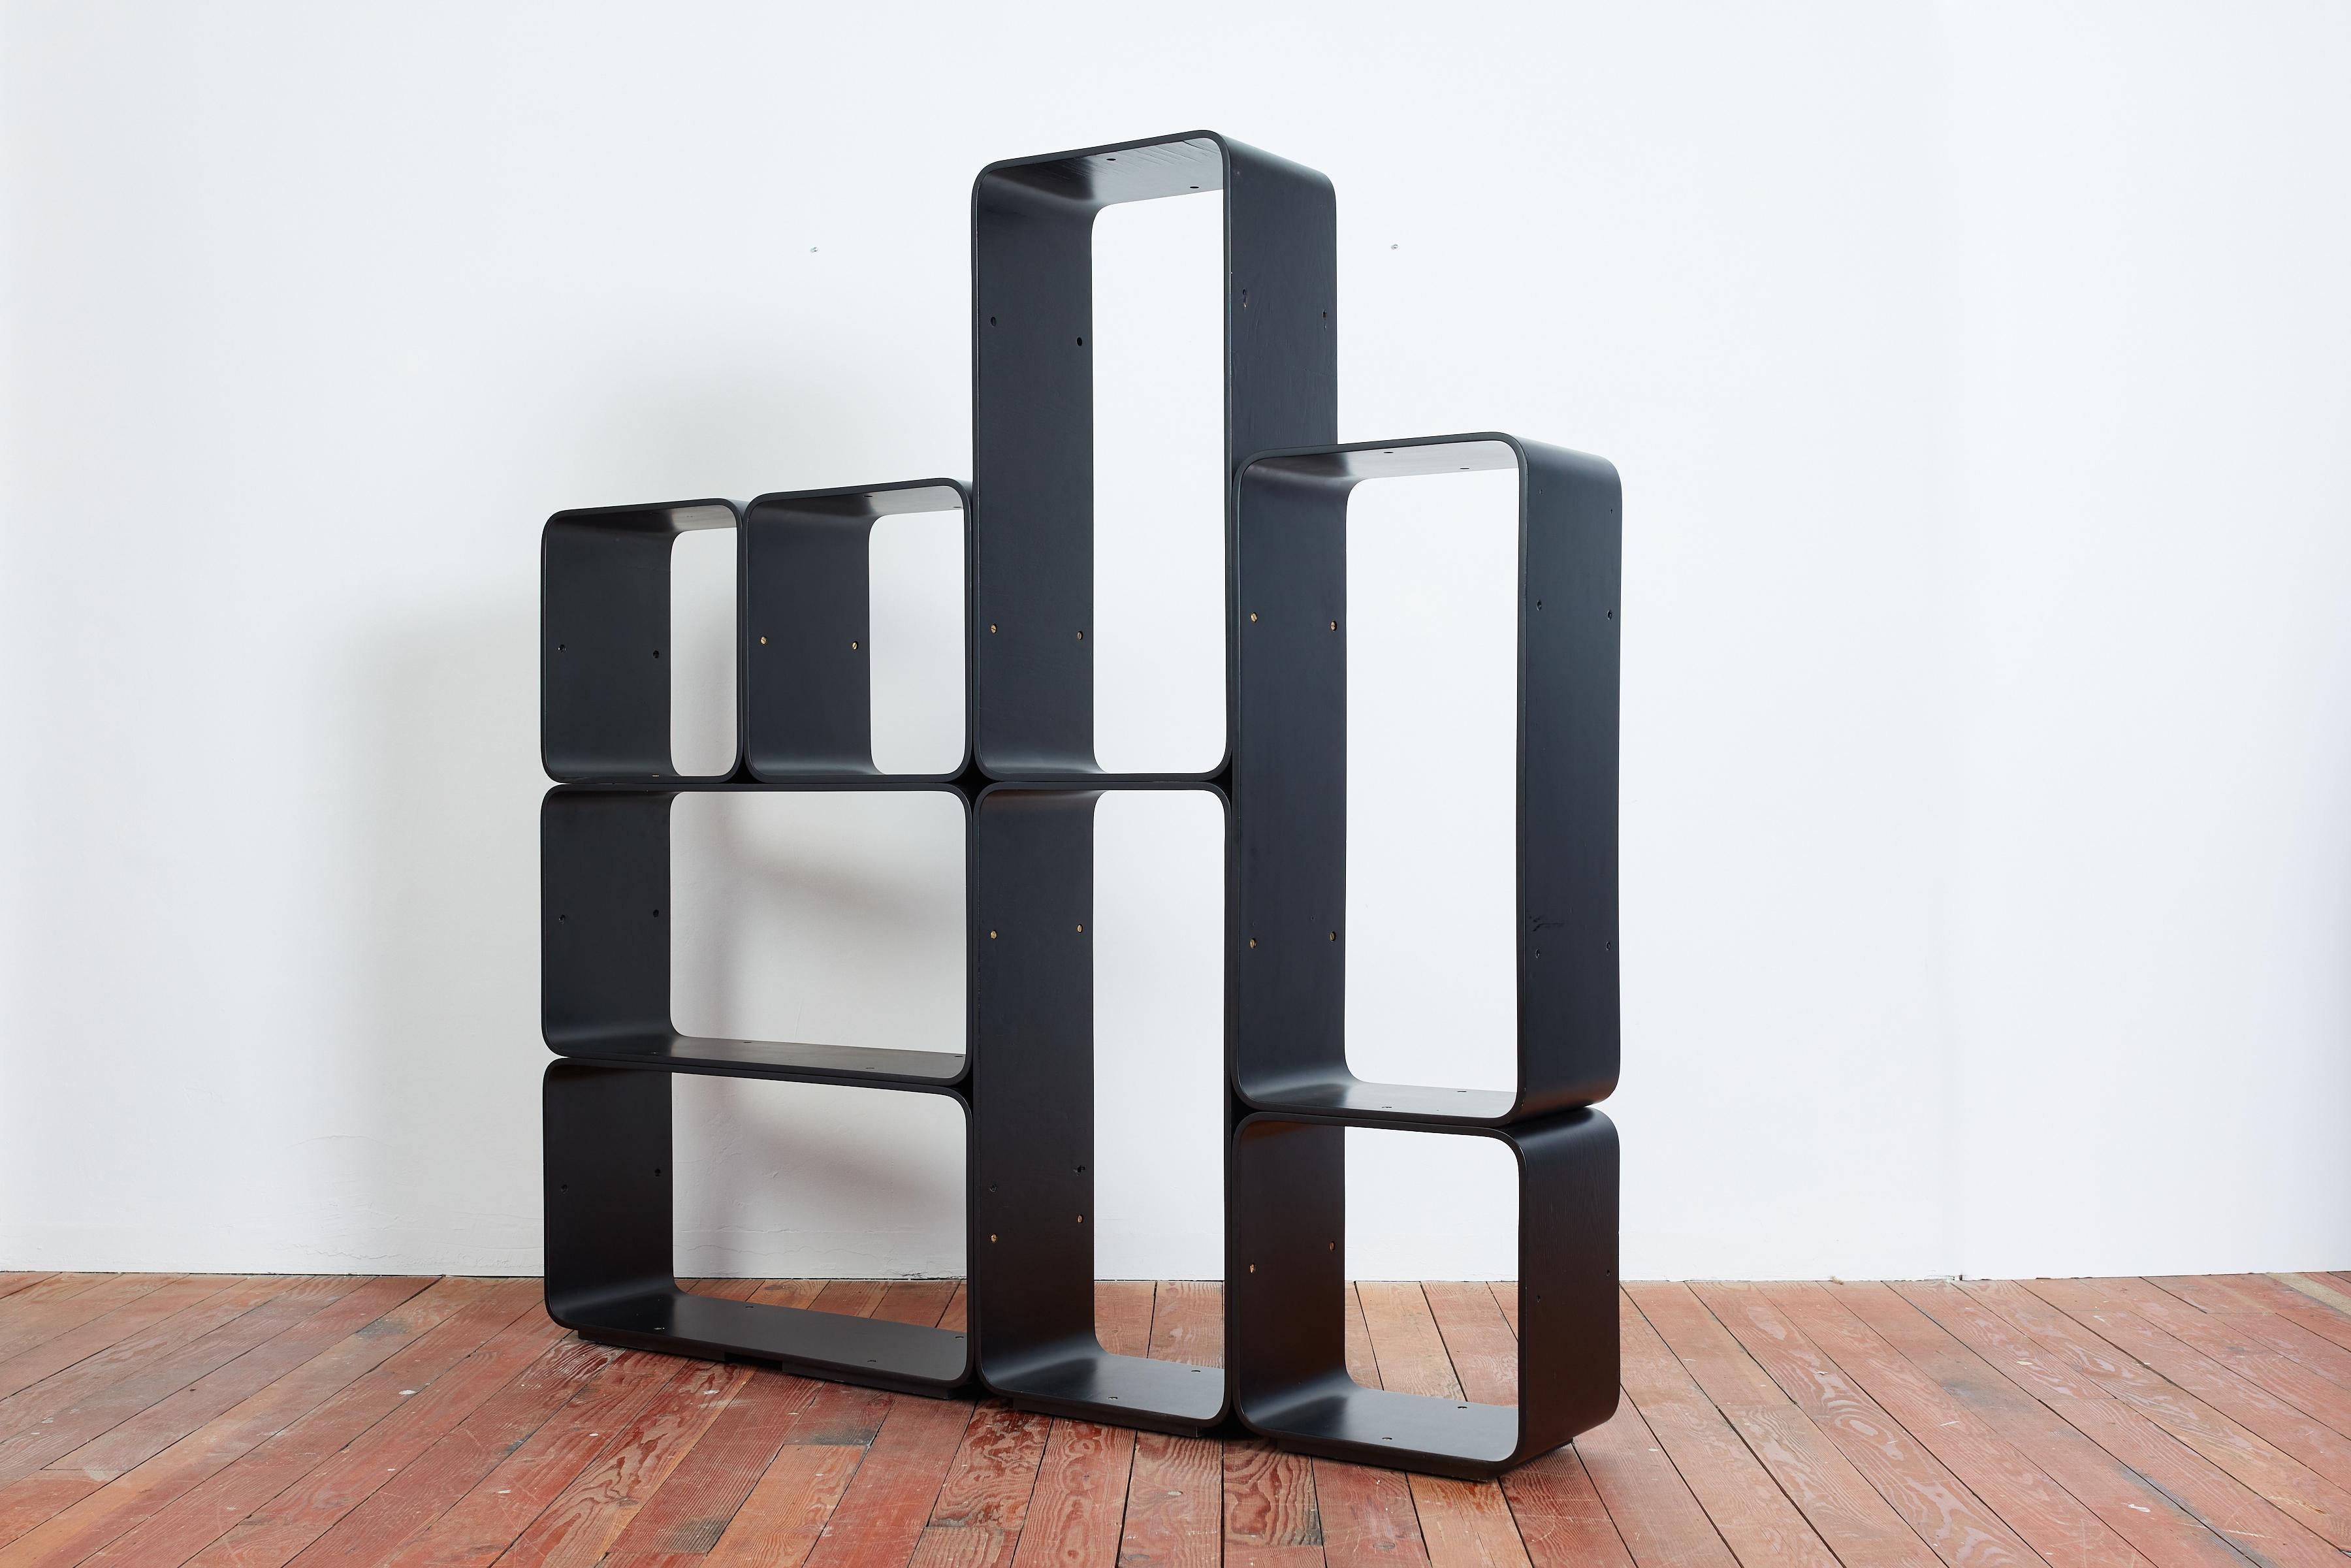 Italian modular bookcase by Carlo de Carli for Fiarm - Italy, 1970s
Comprised of 5 rectangular shapes and 3 square shaped modules - Bookcase is connected with brass hardware and one solid piece
Original black lacquer - professionally restored

